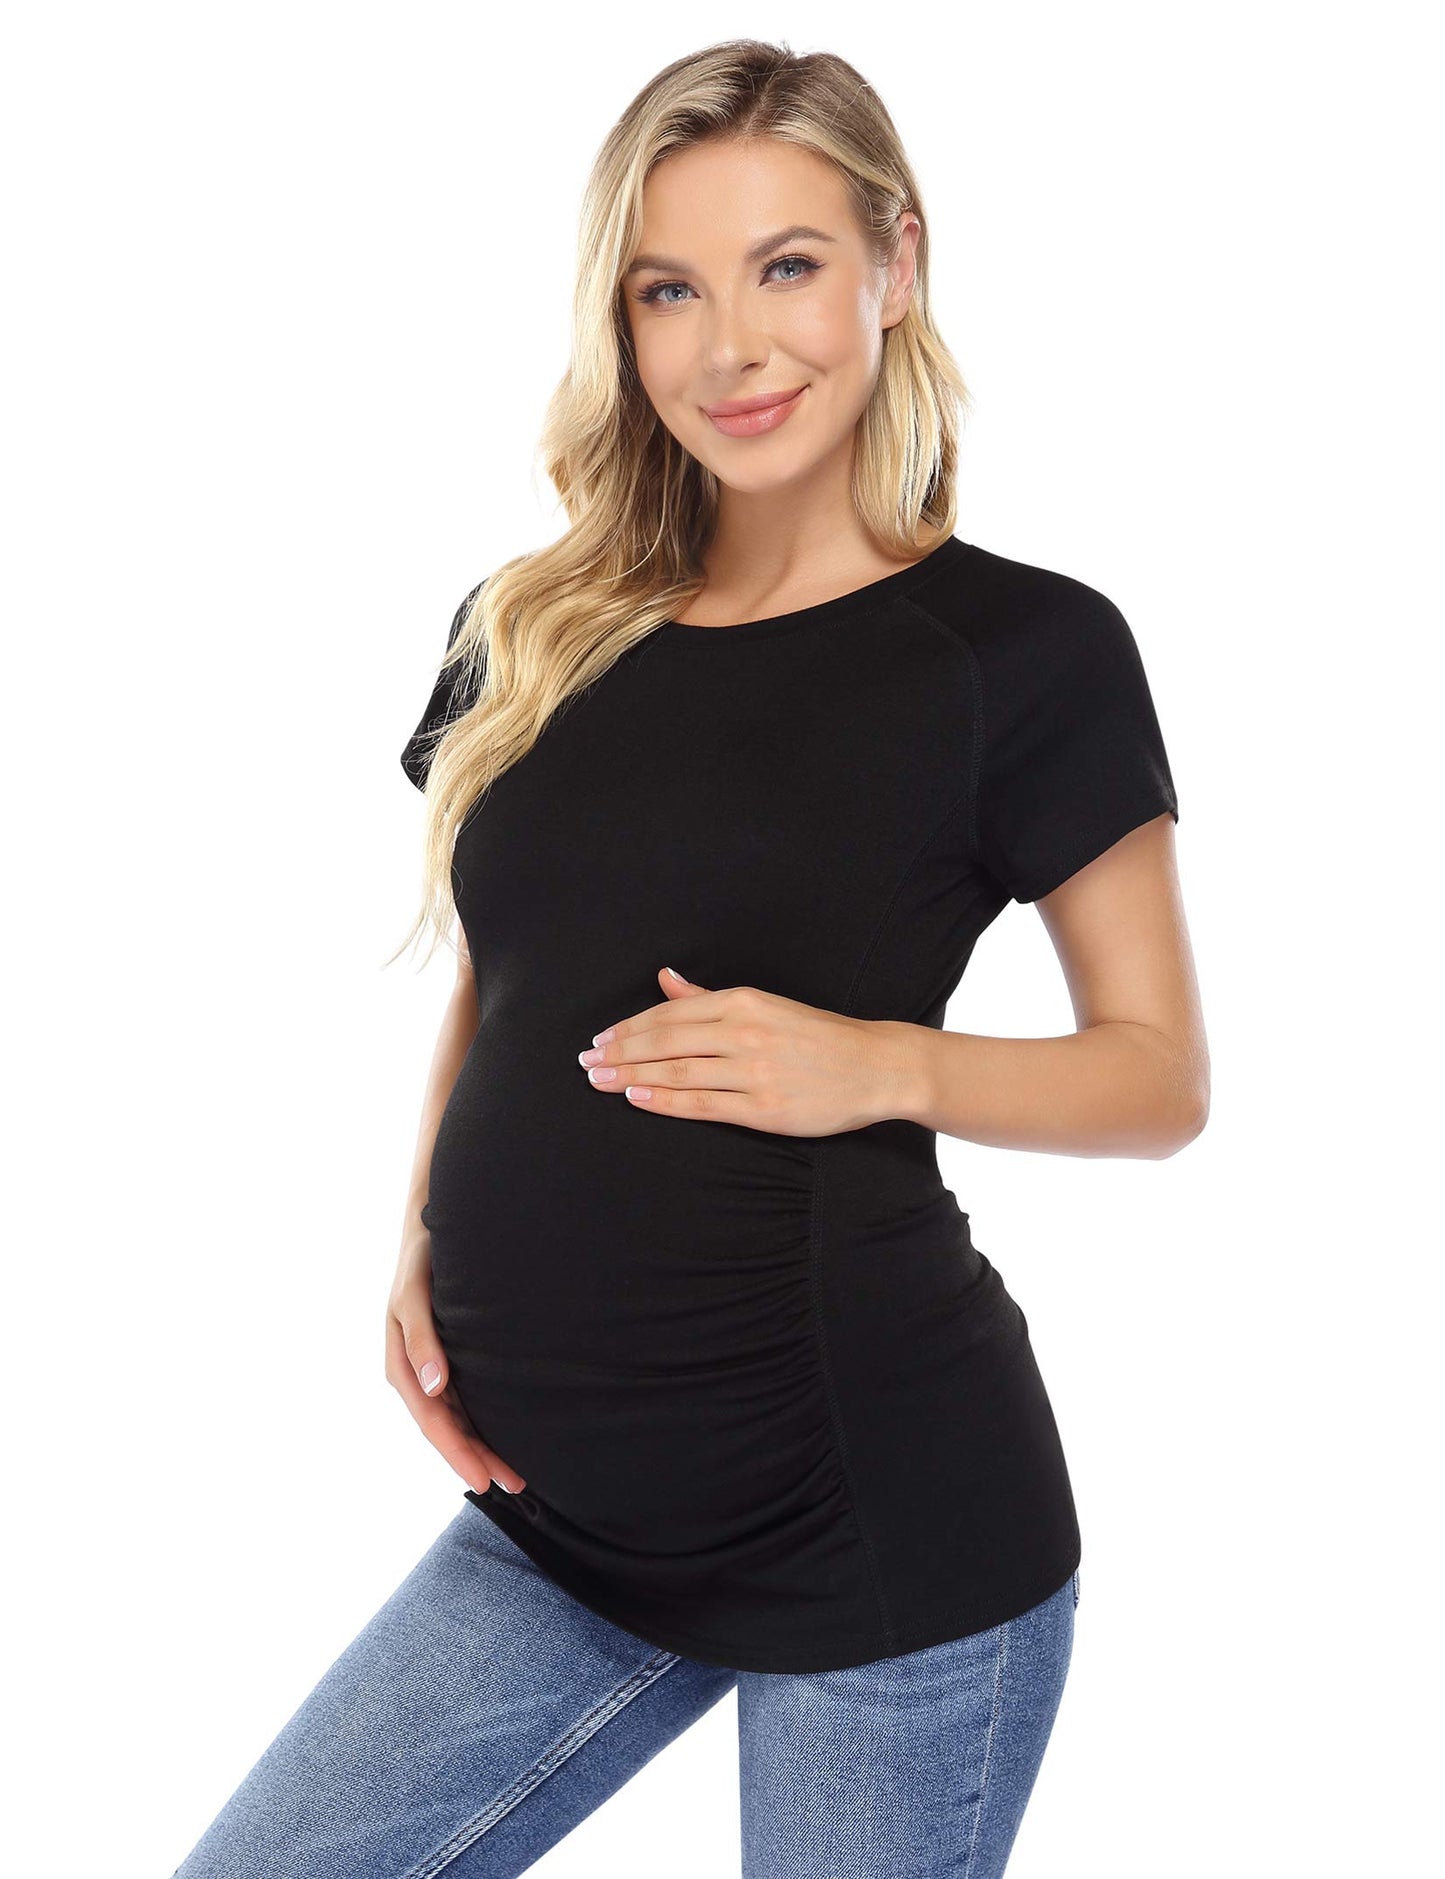 Maternity Activewear Women's Maternity Active Top Yoga Clothes Maternity Workout Athletic Pregnancy Shirt